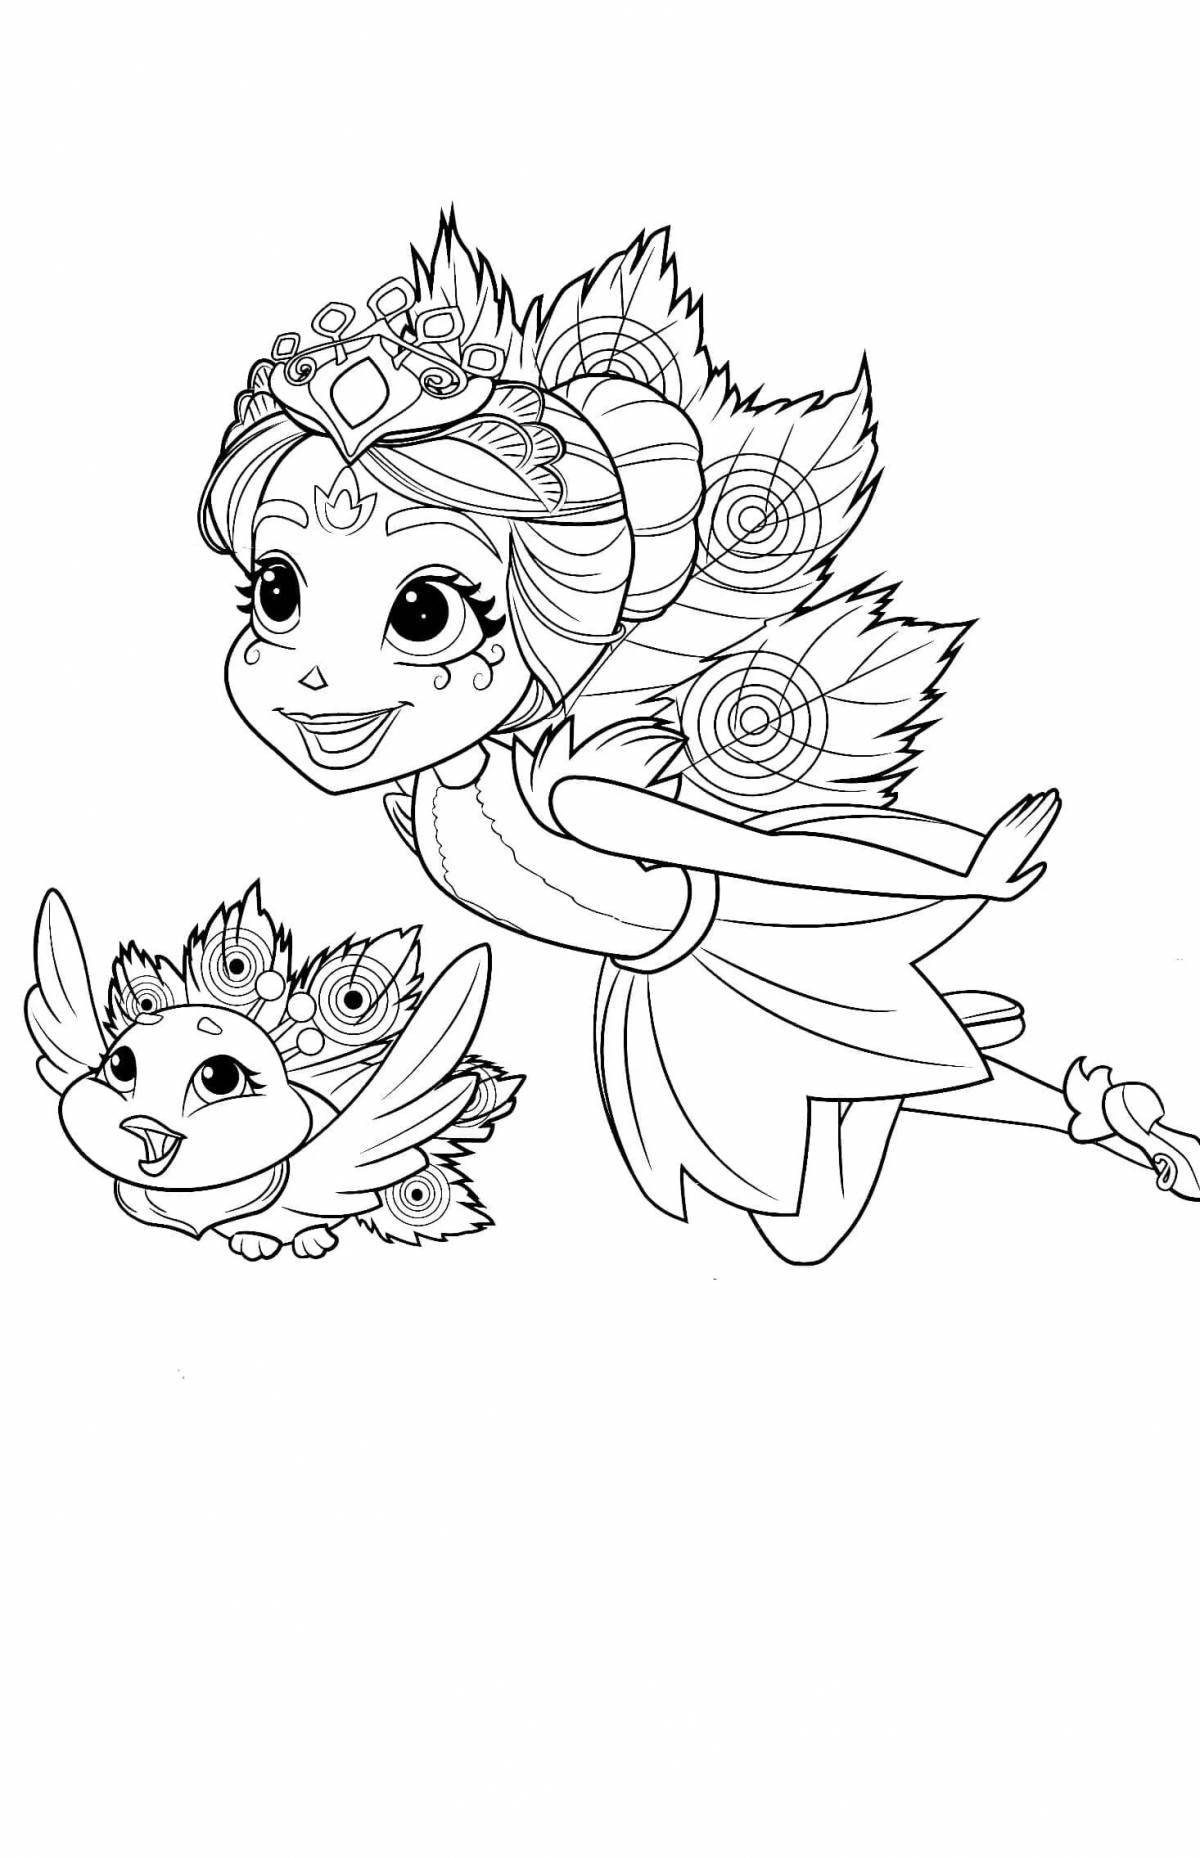 Lovely enchancimals coloring page